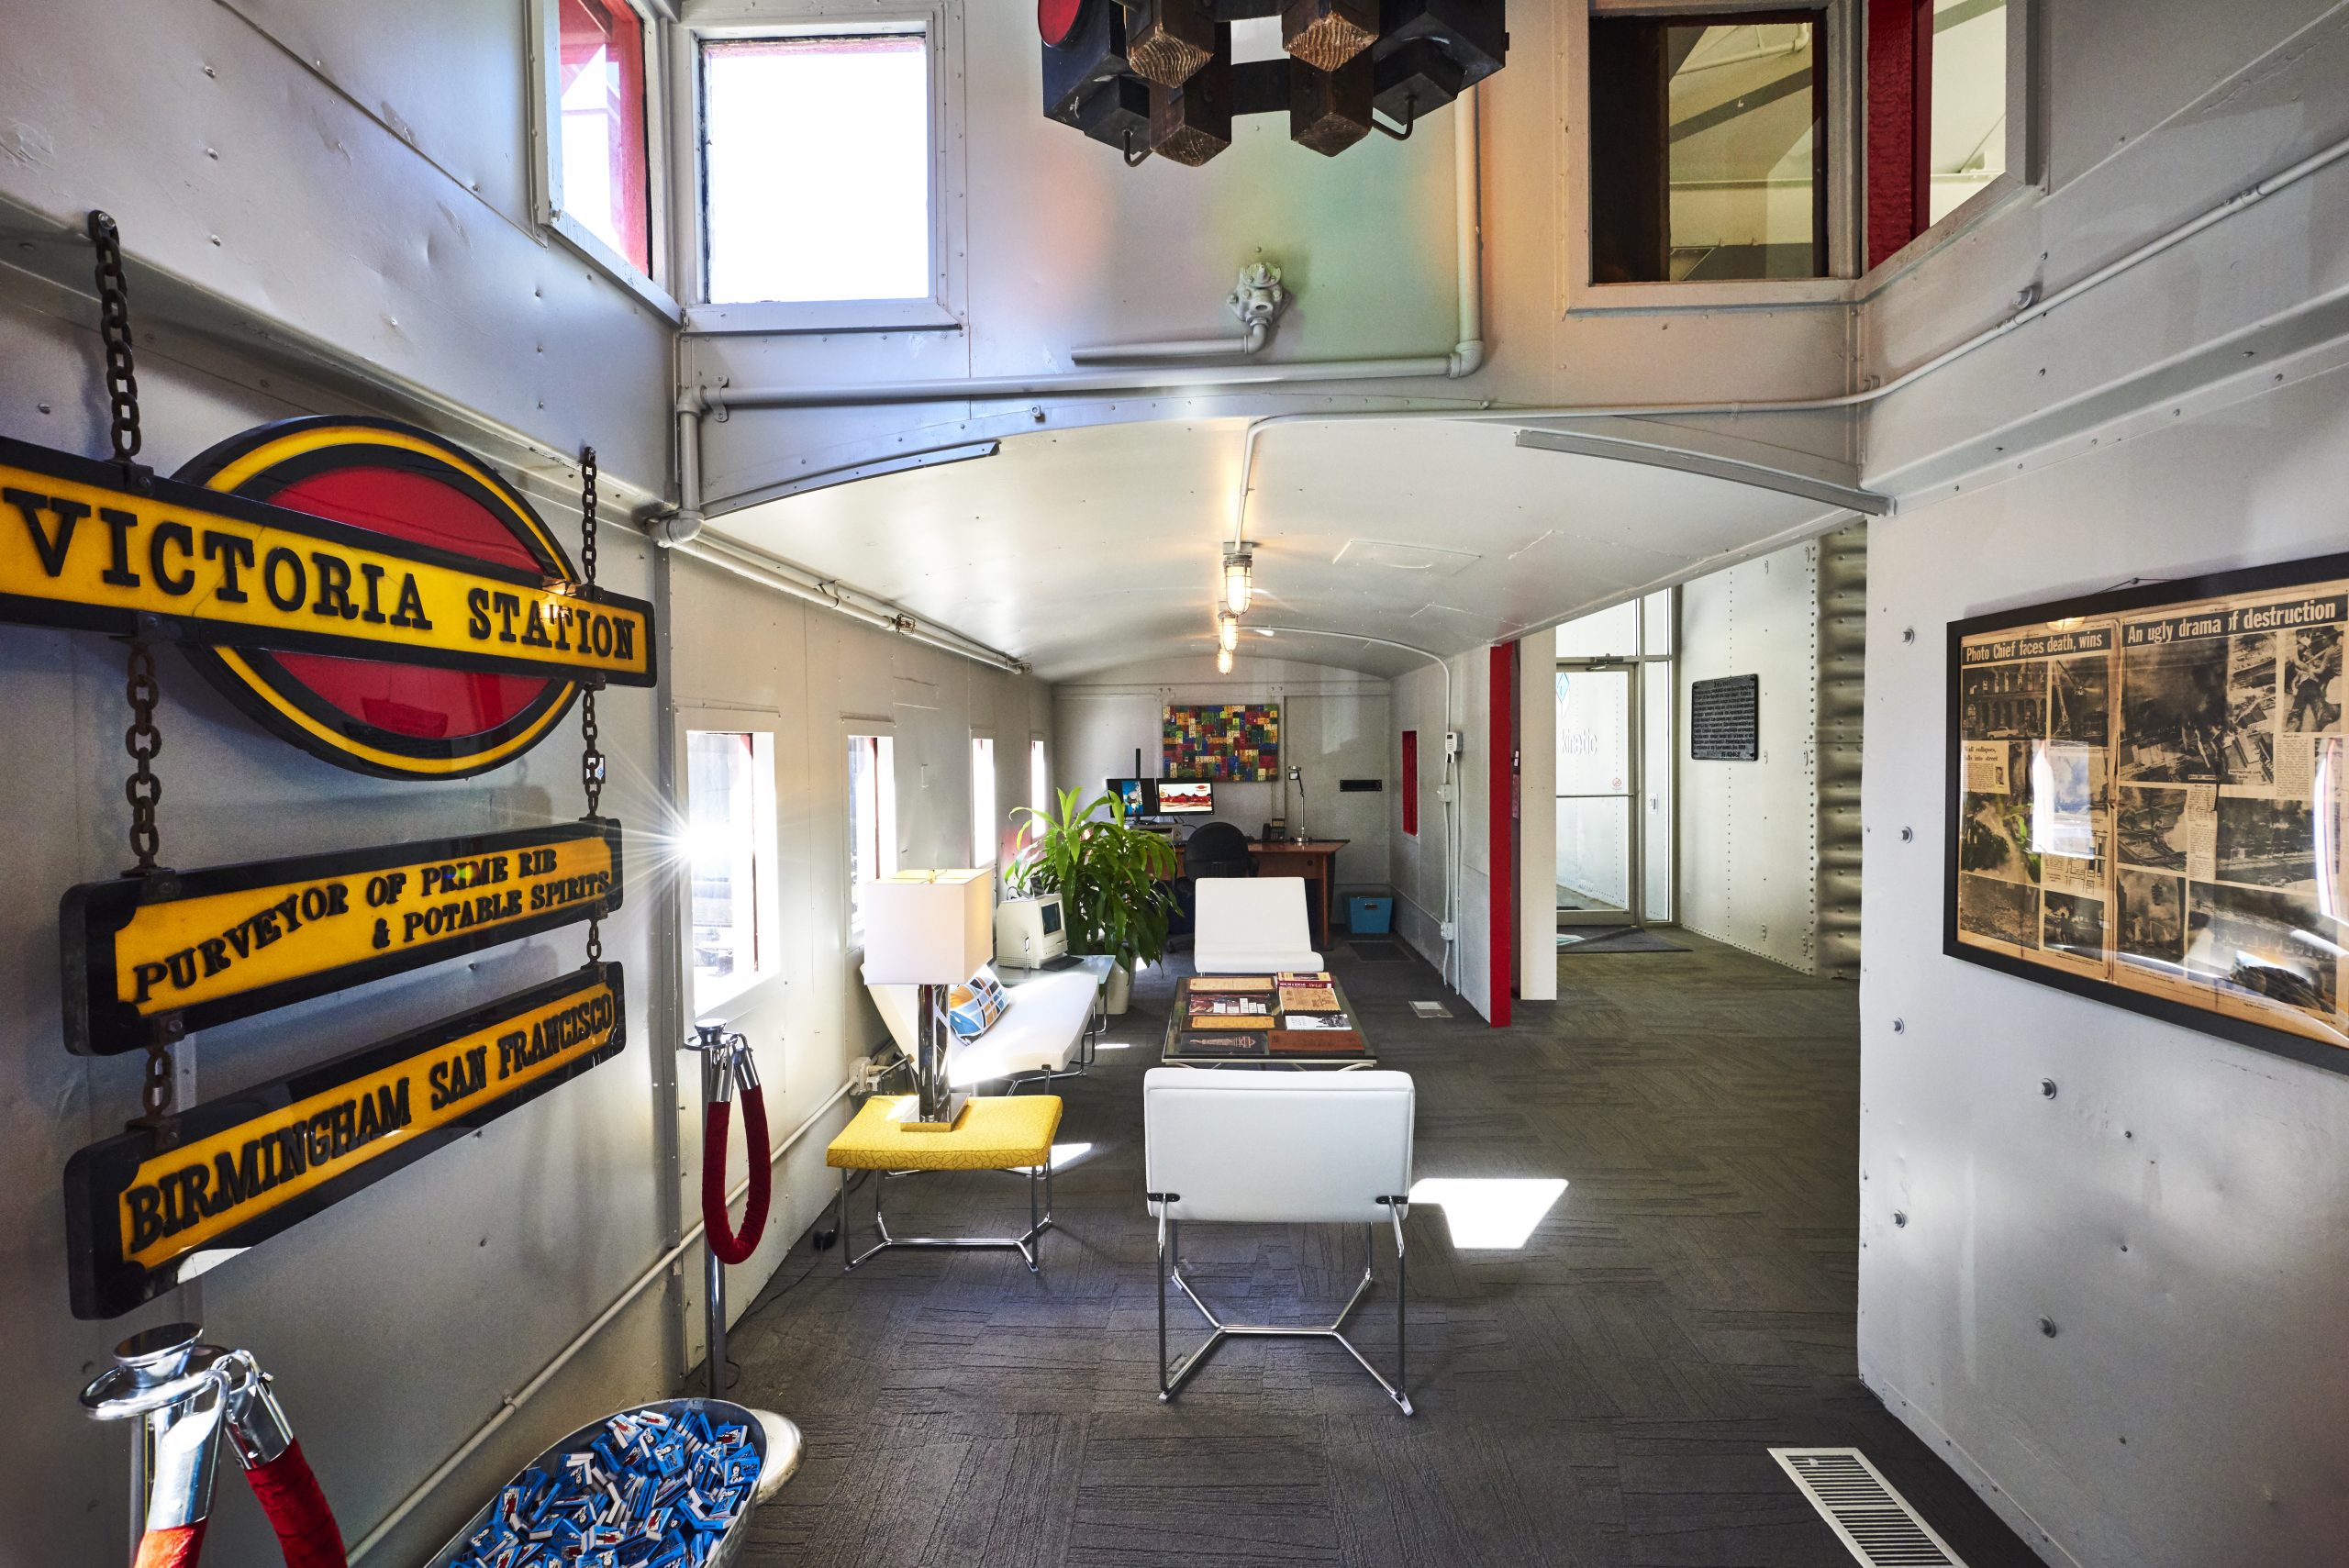 Photo of the the inside of the caboose during daylight hours.